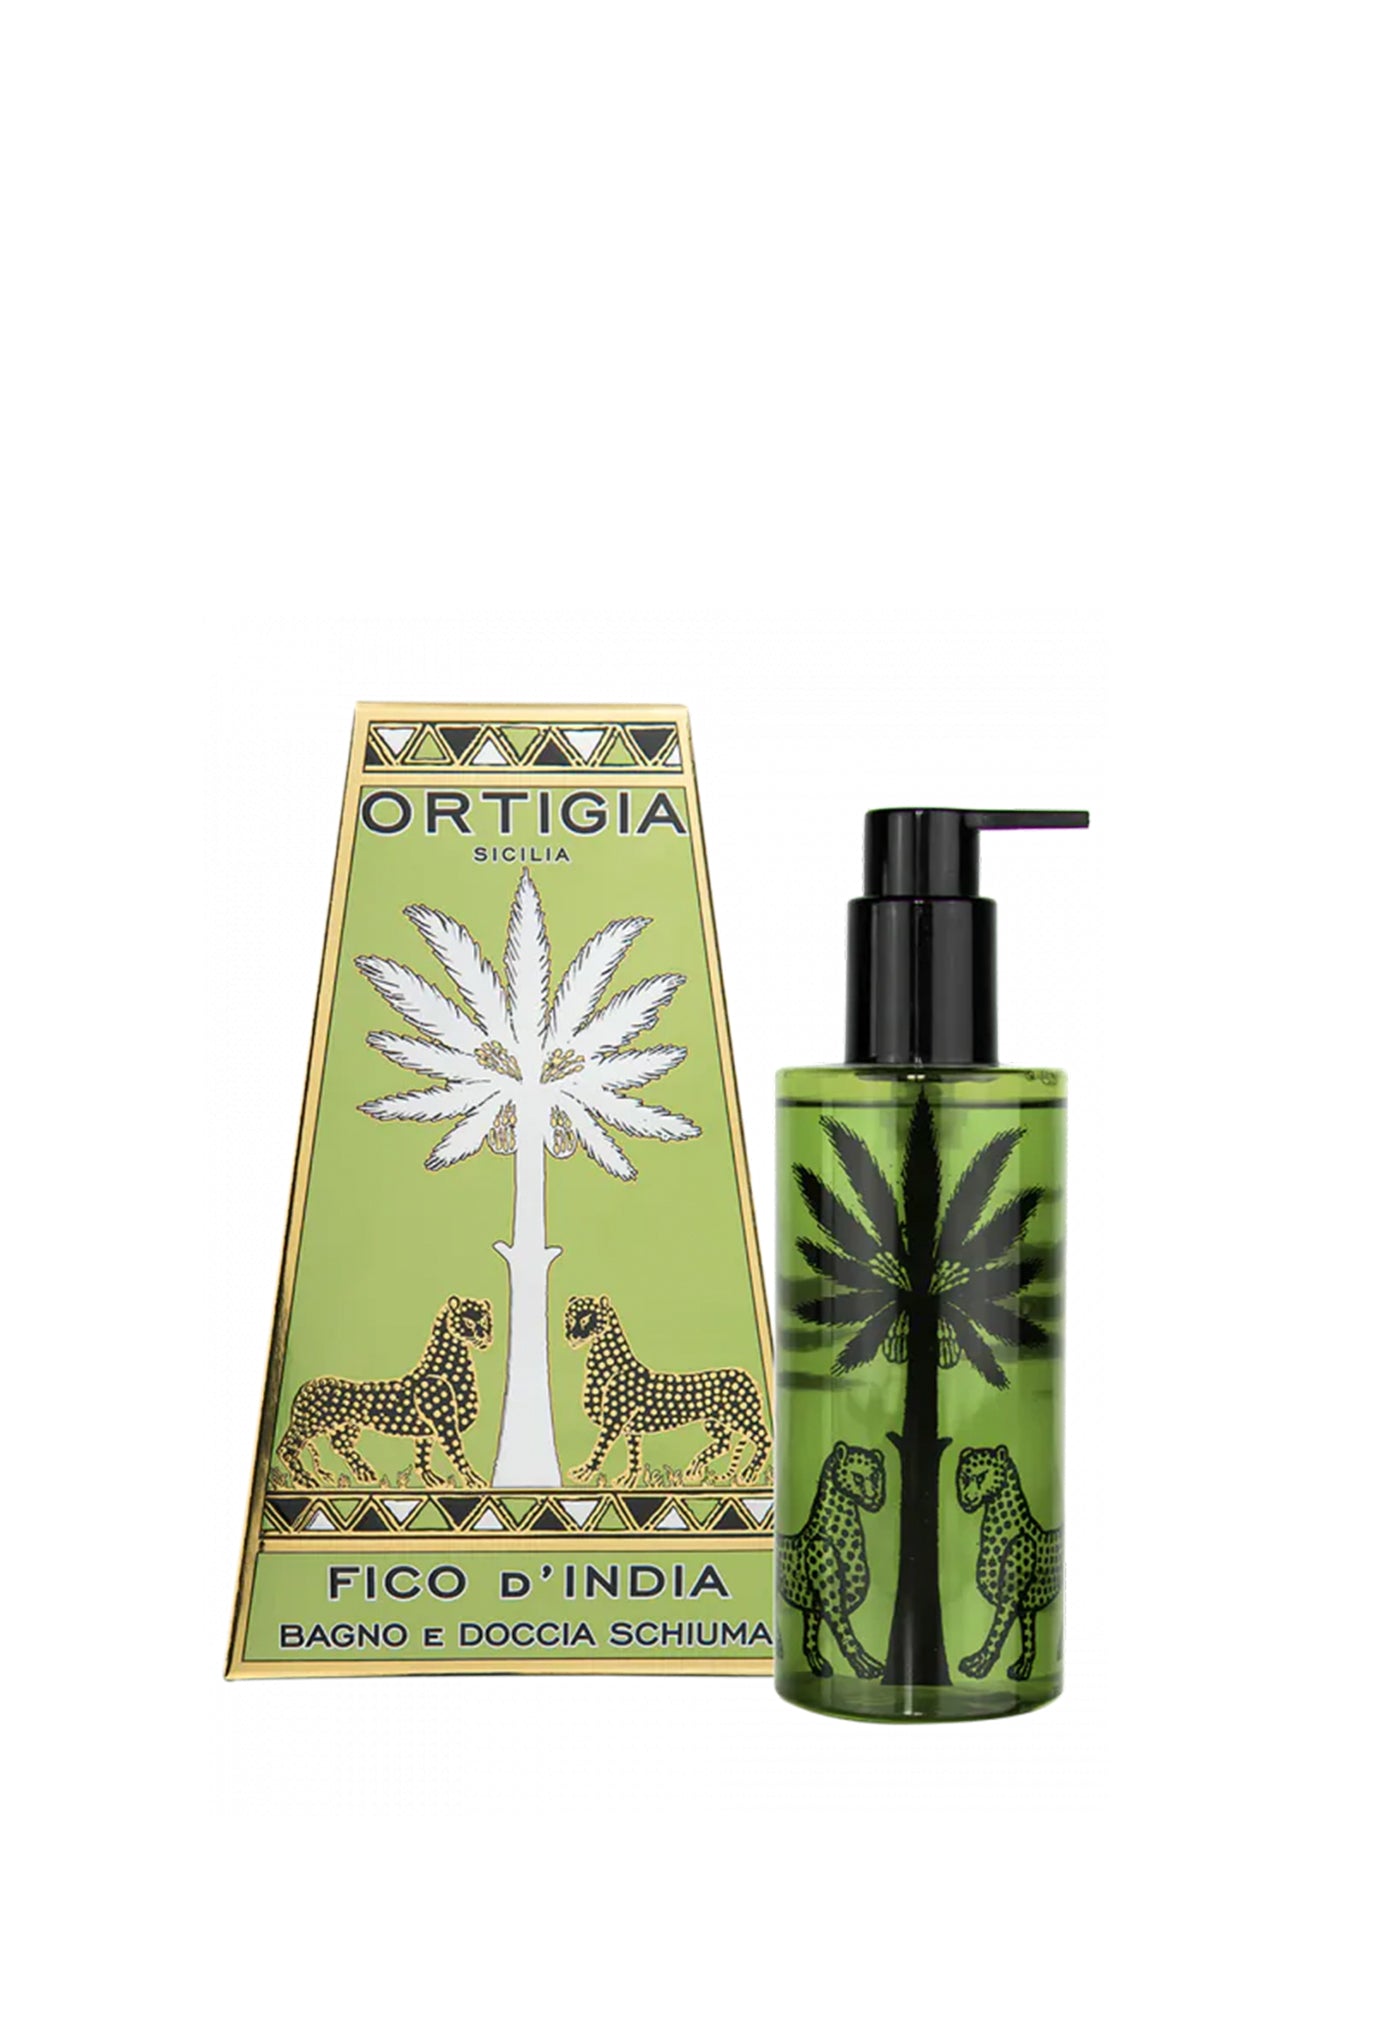 Fico D'India Shower Gel 250ml sold by Angel Divine